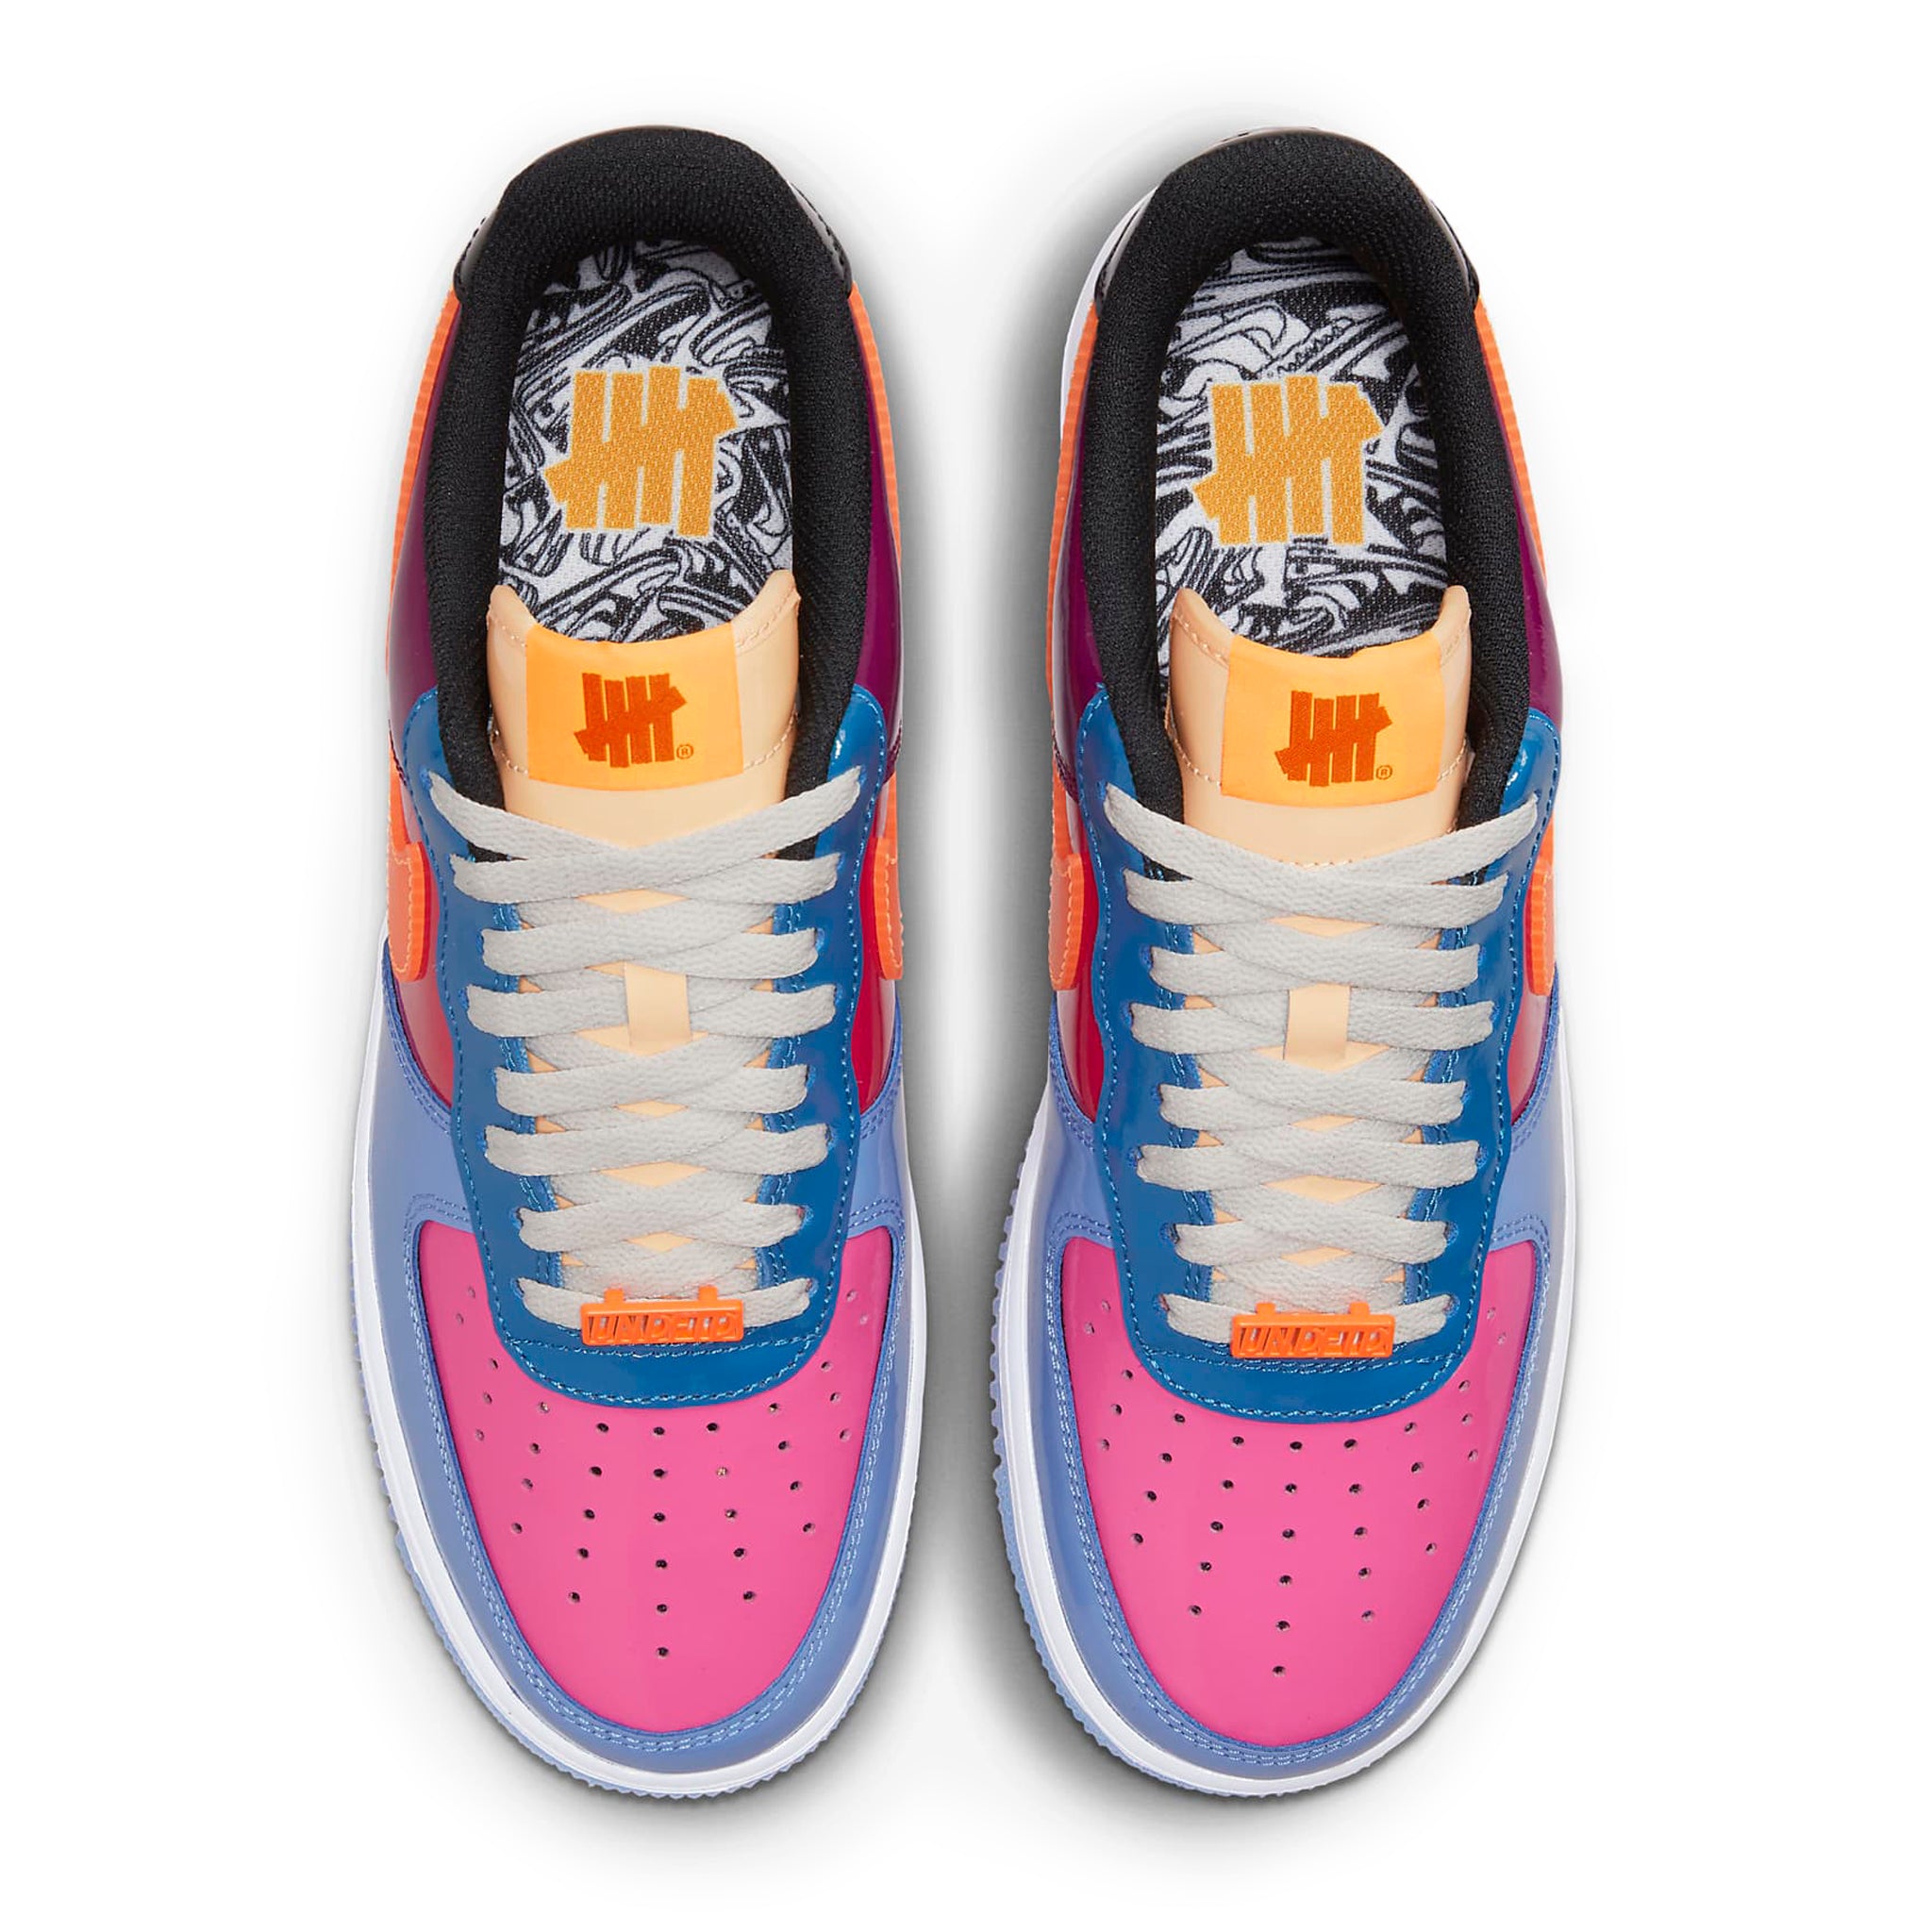 Top view of Undefeated x Nike Air Force 1 Low Multi-Patent DV5255-400